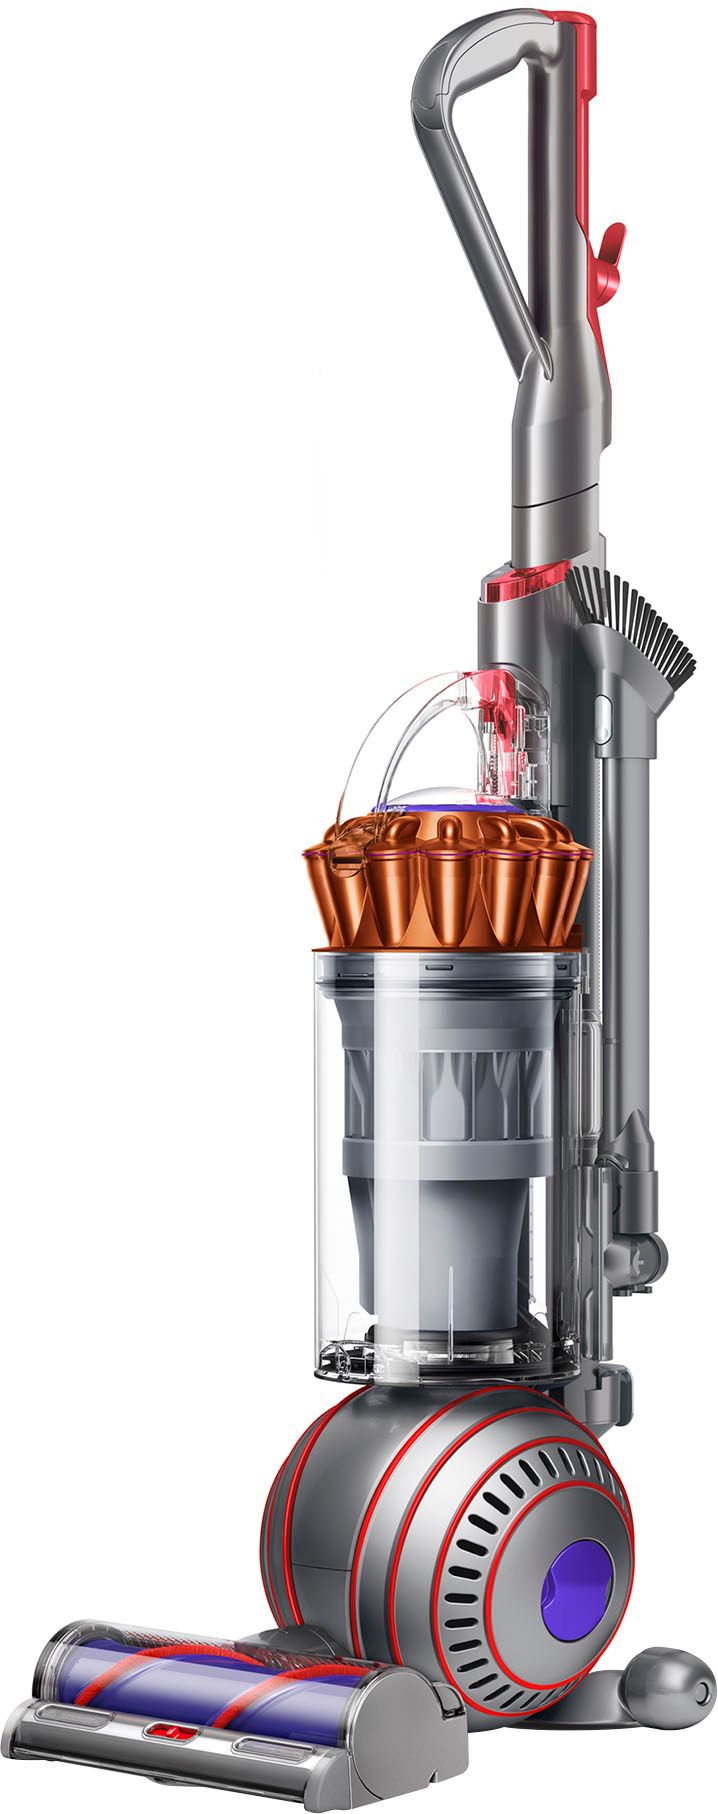 Dyson Ball Animal 3 Extra Upright Vacuum Copper/Silver 394515-01 - Best Buy | Best Buy U.S.